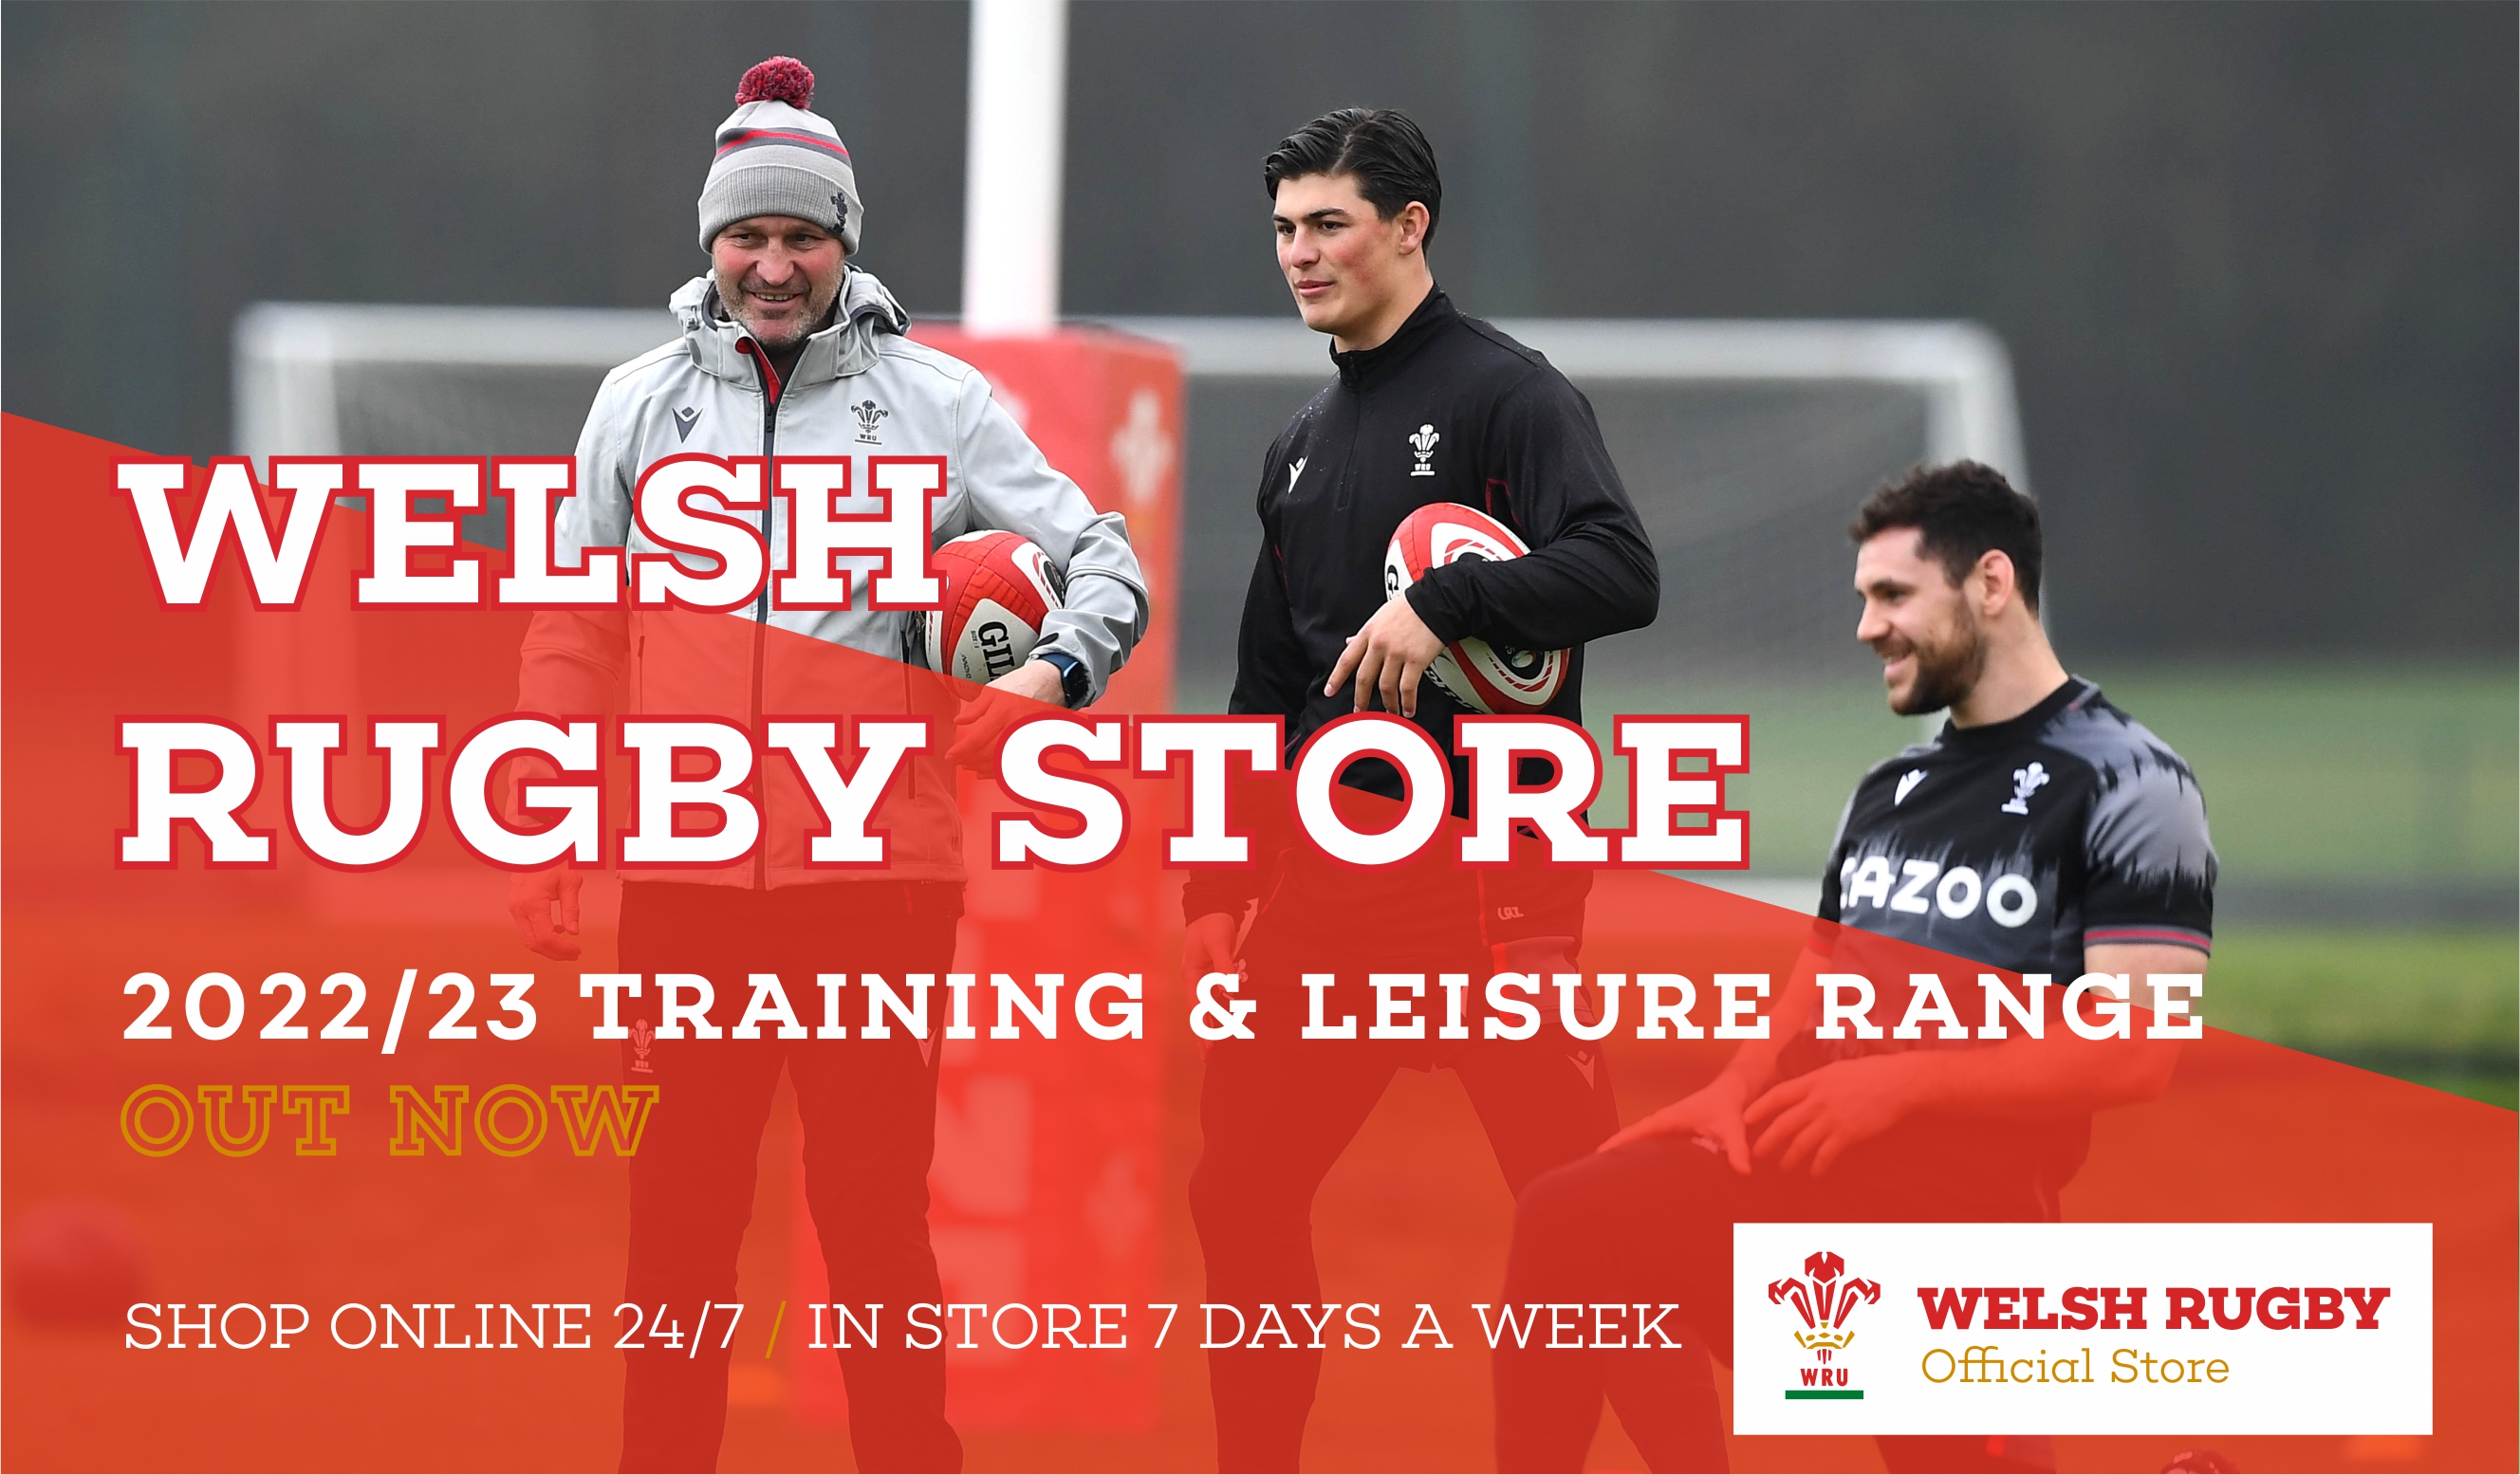 Welsh Rugby Store on X: "SUPER SATURDAY! Our final match of the 2023  @SixNationsRugby is only 1 day away! Shop online 24/7 at  https://t.co/3b9oNsUYJk to shop the 2022/23 range or shop 7